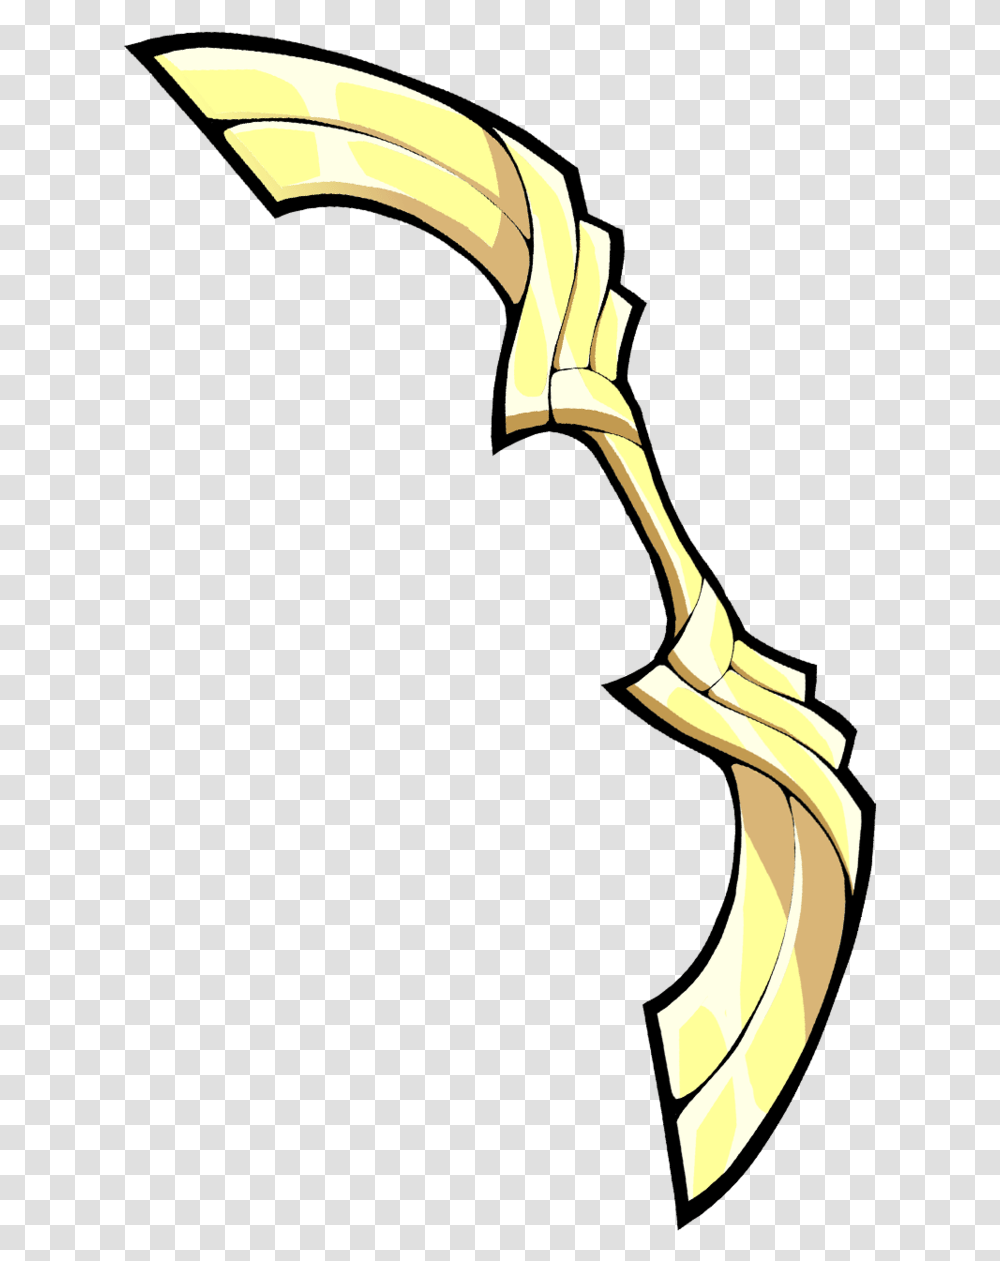 Goldforged Bow Brawlhalla Wiki Brawlhalla Bow, Axe, Tool, Hammer, Plant Transparent Png